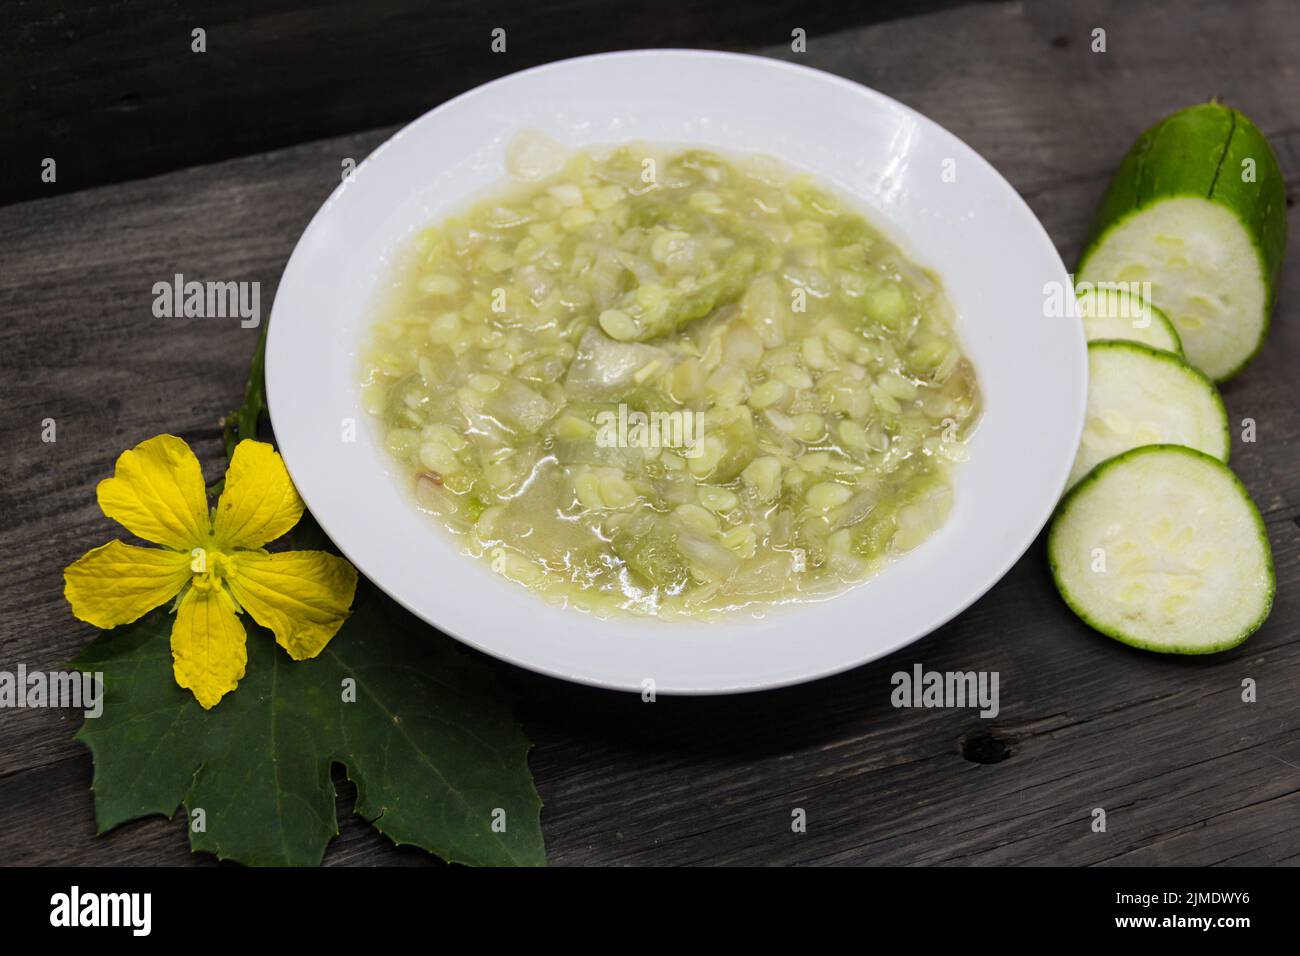 Dish of luffa or immature vegetable sponge fried with garlic and onion. Asian kitchen Stock Photo